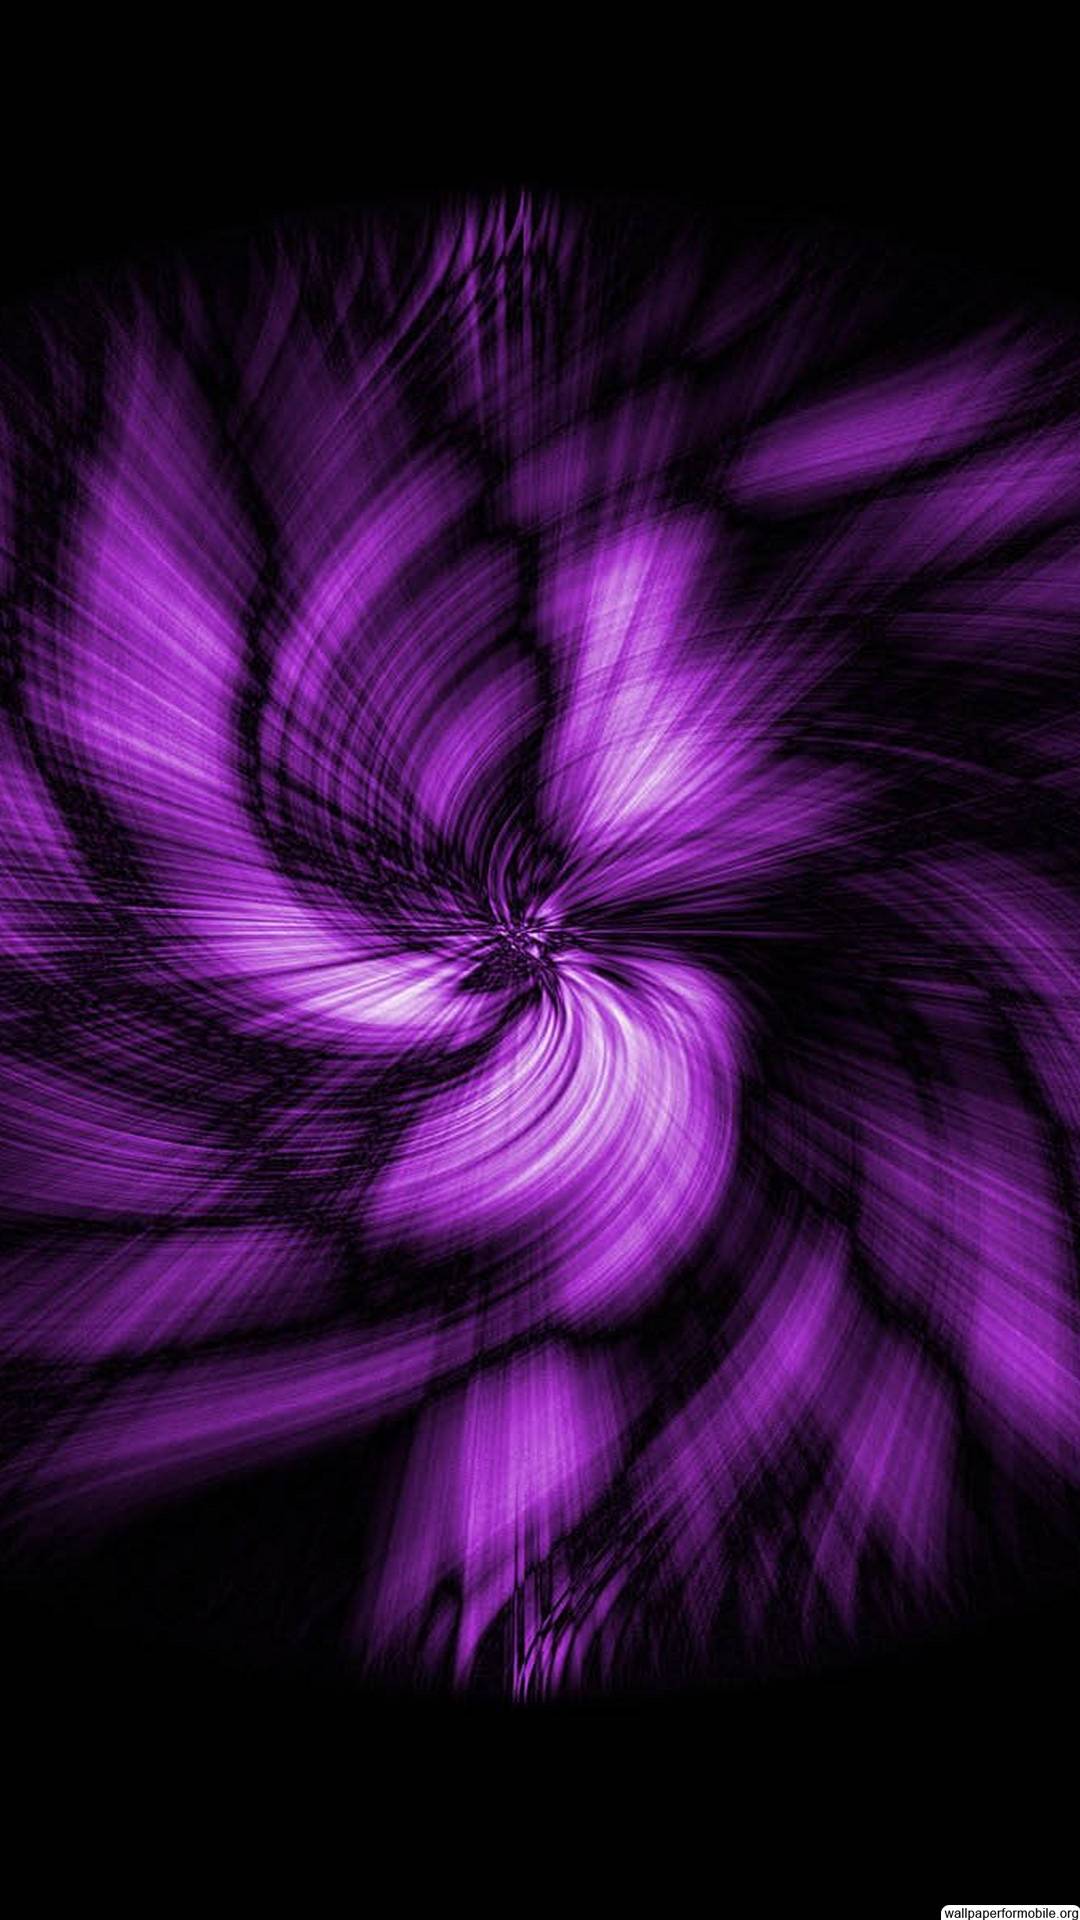 Black and Purple Abstract Wallpaper Free Black